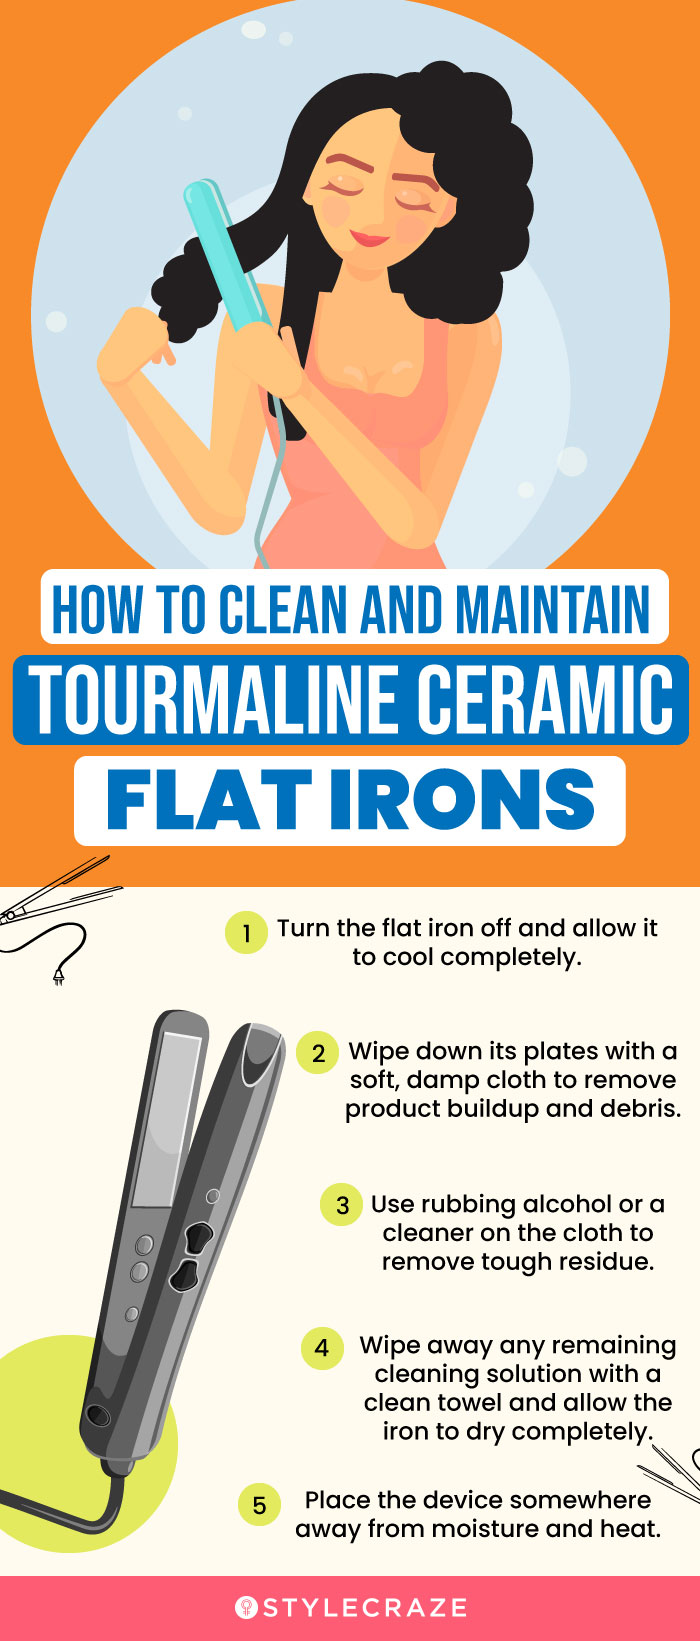 How To Clean And Maintain Tourmaline Ceramic Flat Irons (infographic)